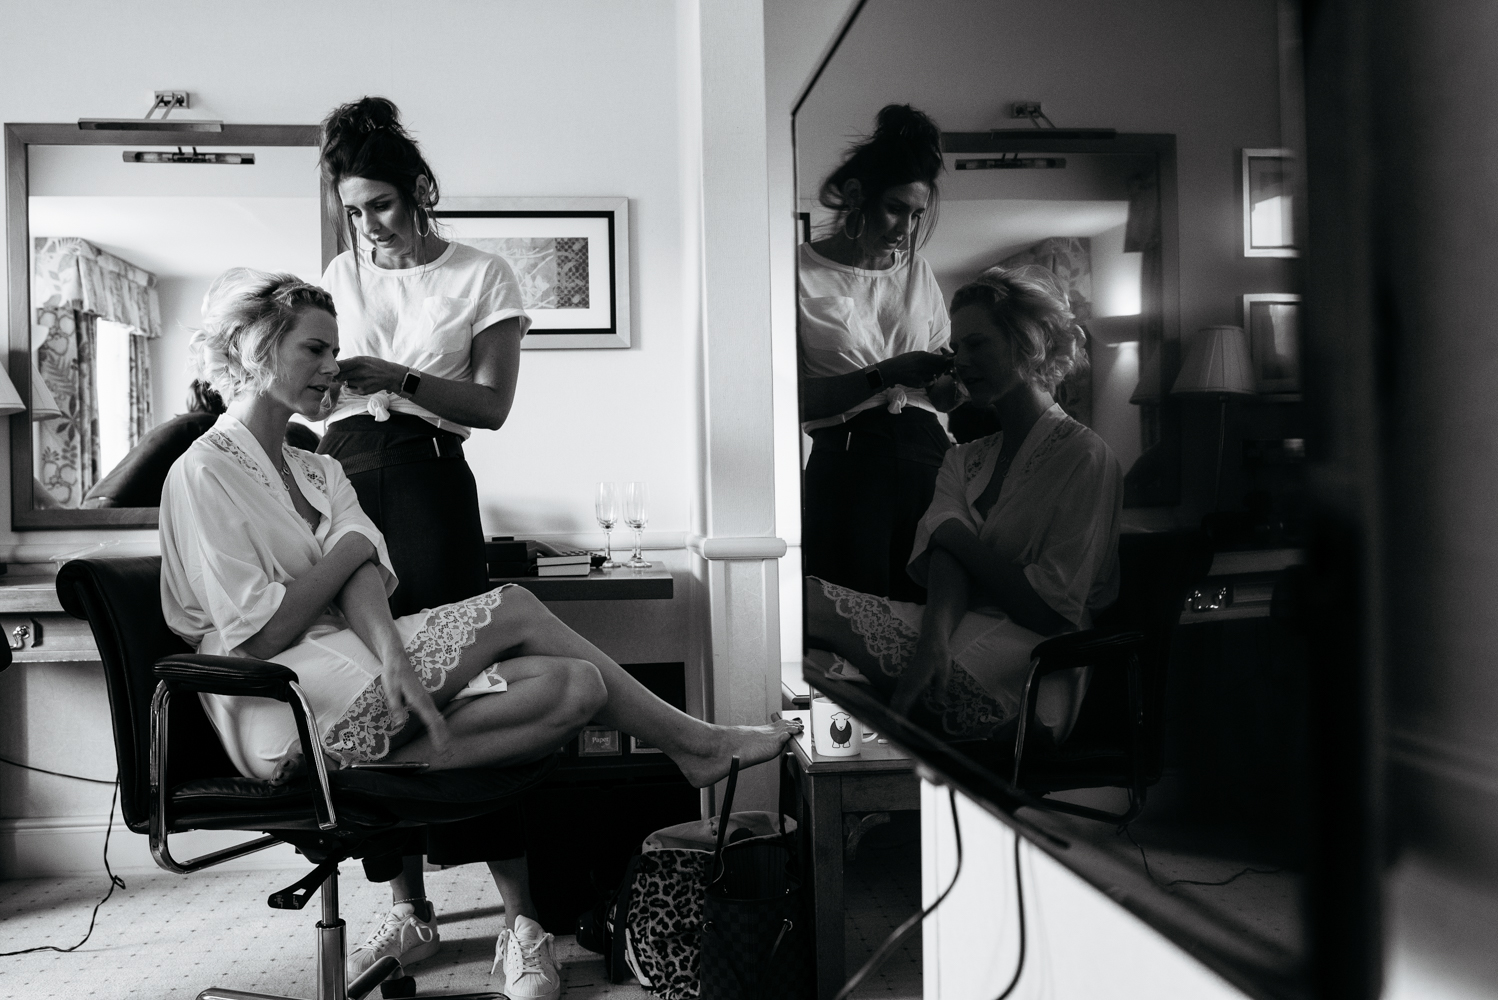 A black and white photograph of a bridesmaid having her hair done during morning bridal preparations